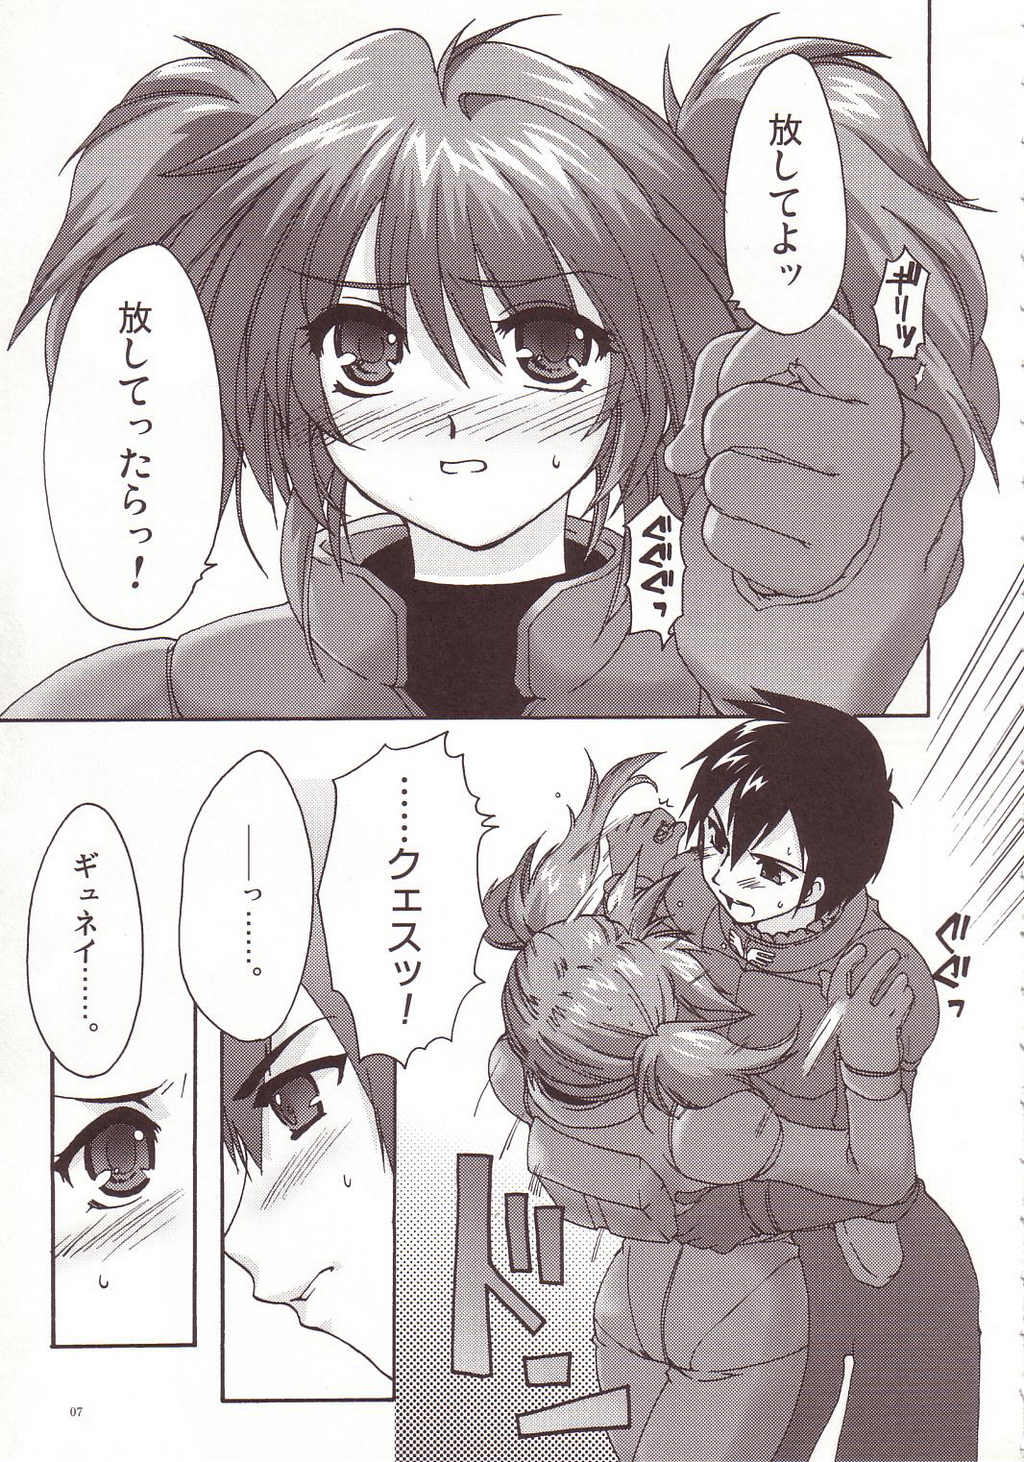 [AKABEi SOFT (Alpha)] Aishitai I WANT TO LOVE (Mobile Suit Gundam Char's Counterattack) page 6 full